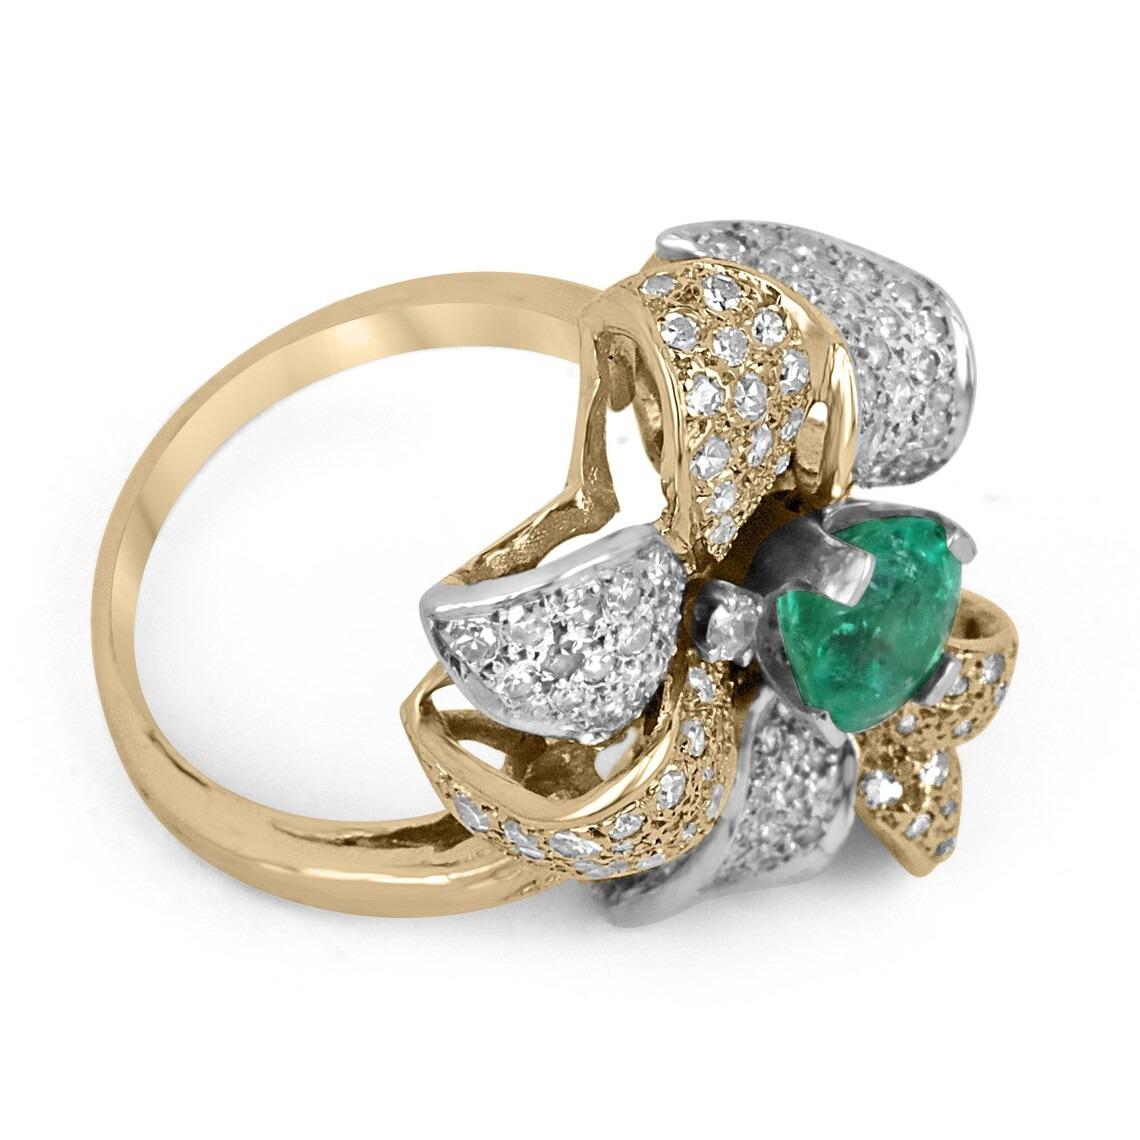 A stunning cocktail statement ring makes its grand appearance. A remarkable Colombian emerald weighing a little over a carat in size displays a ravishing, vivacious, medium emerald green color with very good clarity and luster. It is the center of